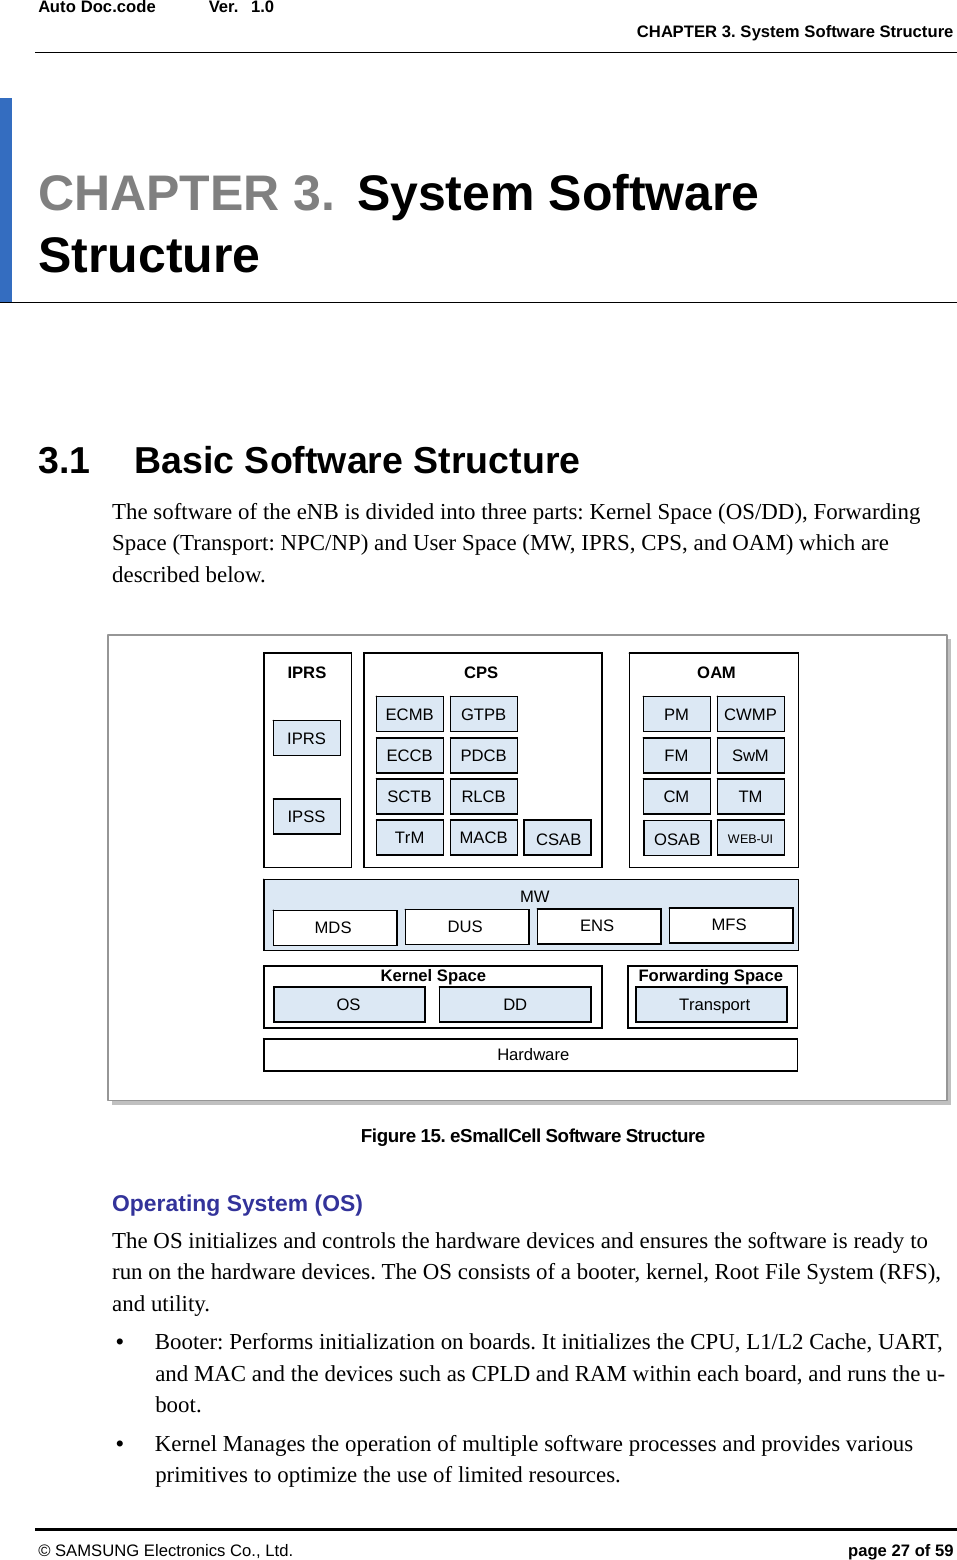  Ver.  CHAPTER 3. System Software Structure © SAMSUNG Electronics Co., Ltd.  page 27 of 59 Auto Doc.code  1.0 CHAPTER 3. System Software Structure     3.1  Basic Software Structure   The software of the eNB is divided into three parts: Kernel Space (OS/DD), Forwarding Space (Transport: NPC/NP) and User Space (MW, IPRS, CPS, and OAM) which are described below.  Figure 15. eSmallCell Software Structure  Operating System (OS) The OS initializes and controls the hardware devices and ensures the software is ready to run on the hardware devices. The OS consists of a booter, kernel, Root File System (RFS), and utility. y Booter: Performs initialization on boards. It initializes the CPU, L1/L2 Cache, UART, and MAC and the devices such as CPLD and RAM within each board, and runs the u-boot.  y Kernel Manages the operation of multiple software processes and provides various primitives to optimize the use of limited resources. IPRS IPRS IPSS CPSECMBECCBSCTBTrMGTPBPDCBRLCBMACBOAMPMFMCMCWMP SwM TM WEB-UI MWTransport OS  DD HardwareOSABCSABKernel Space  Forwarding Space MDS  DUS  ENS  MFS 